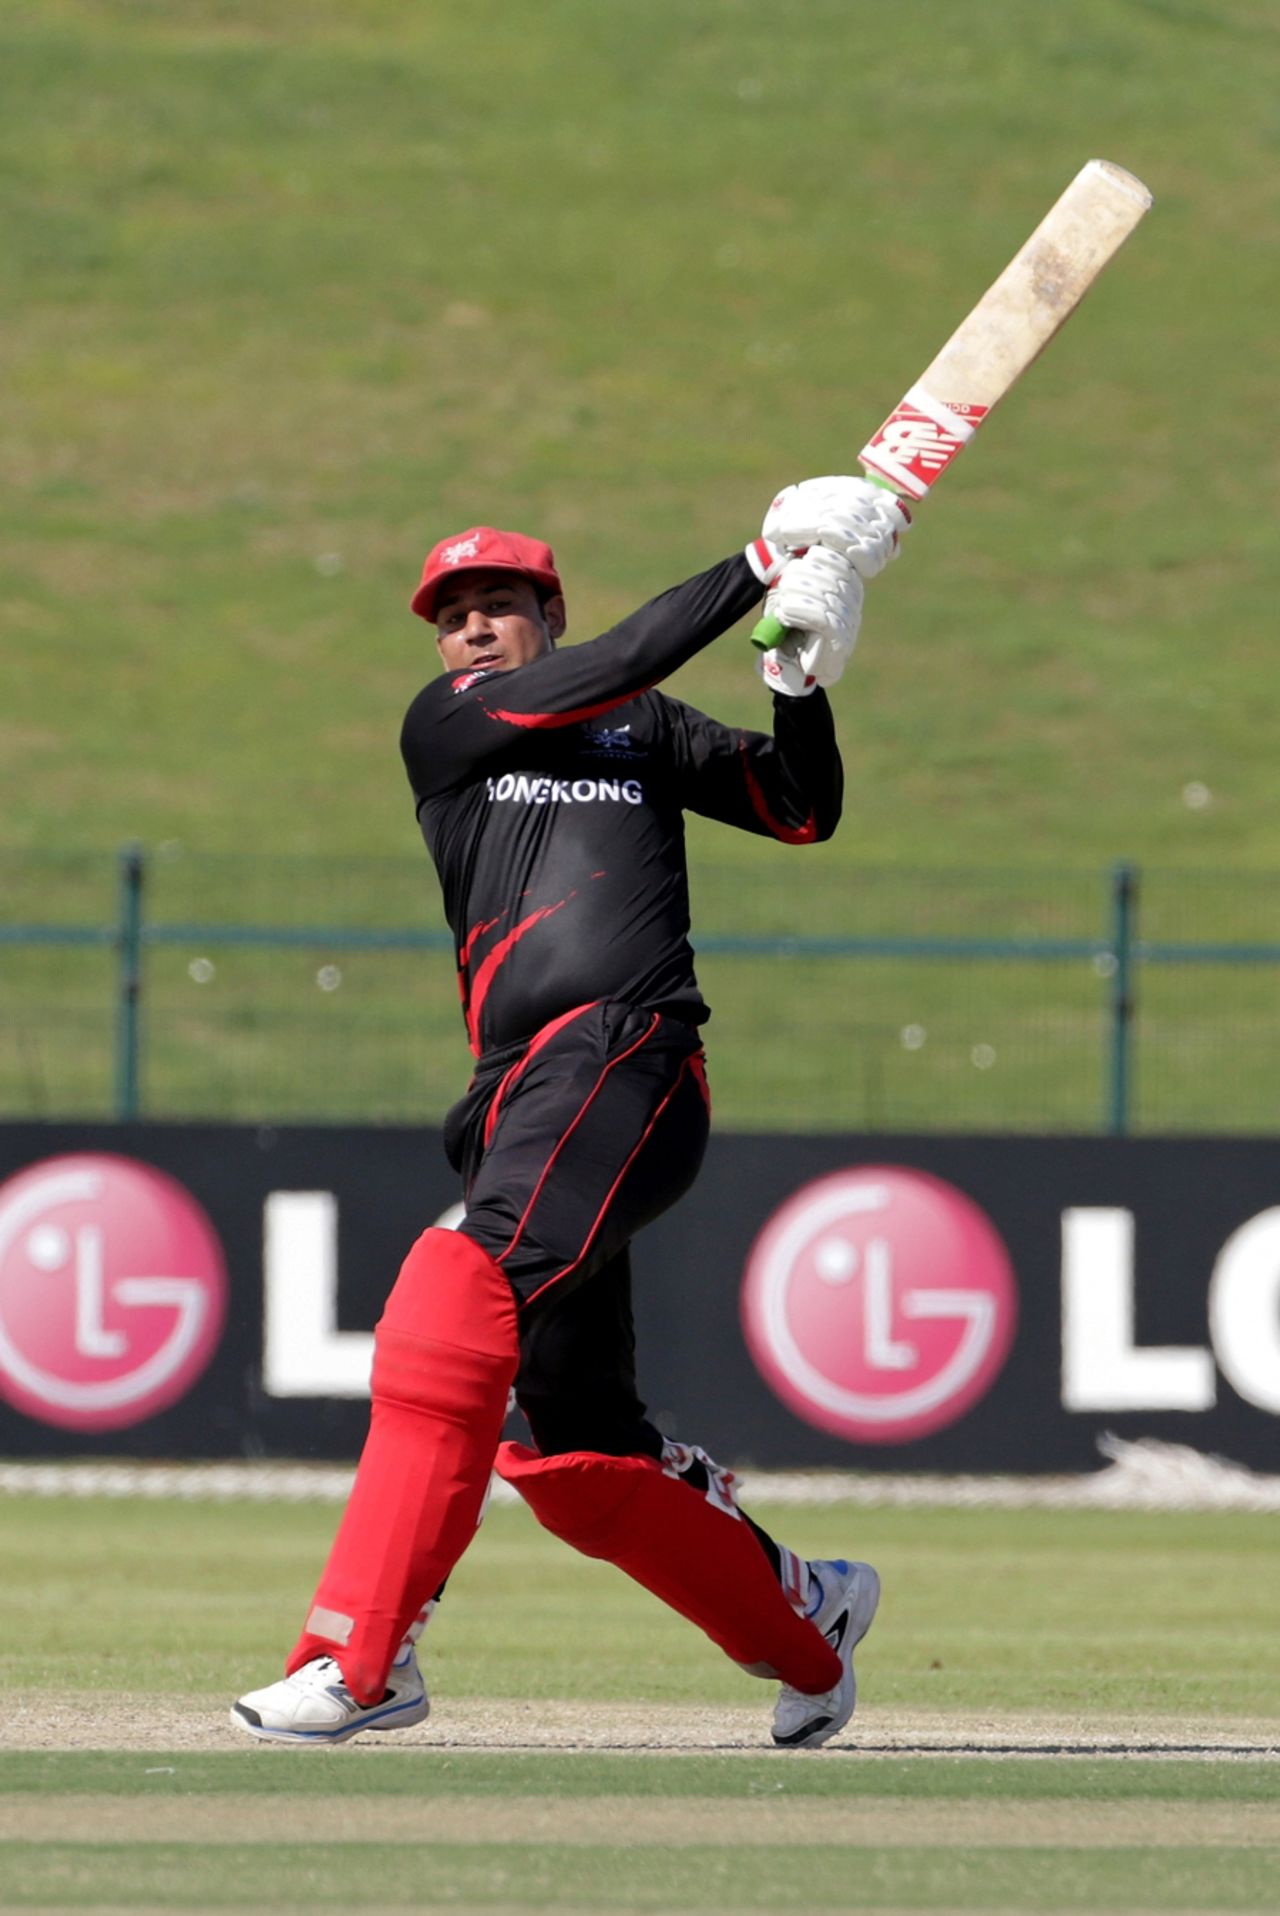 Babar Hayat batting during the Papua New Guinea v Hong Kong Qualifying  Play-off match at the ICC World Twenty20 Qualifiers at the Zayed Cricket Stadium on November 28, 2013 in Abu Dhabi, United Arab Emirates. (Photo by Graham Crouch-IDI/IDI via Getty Images)